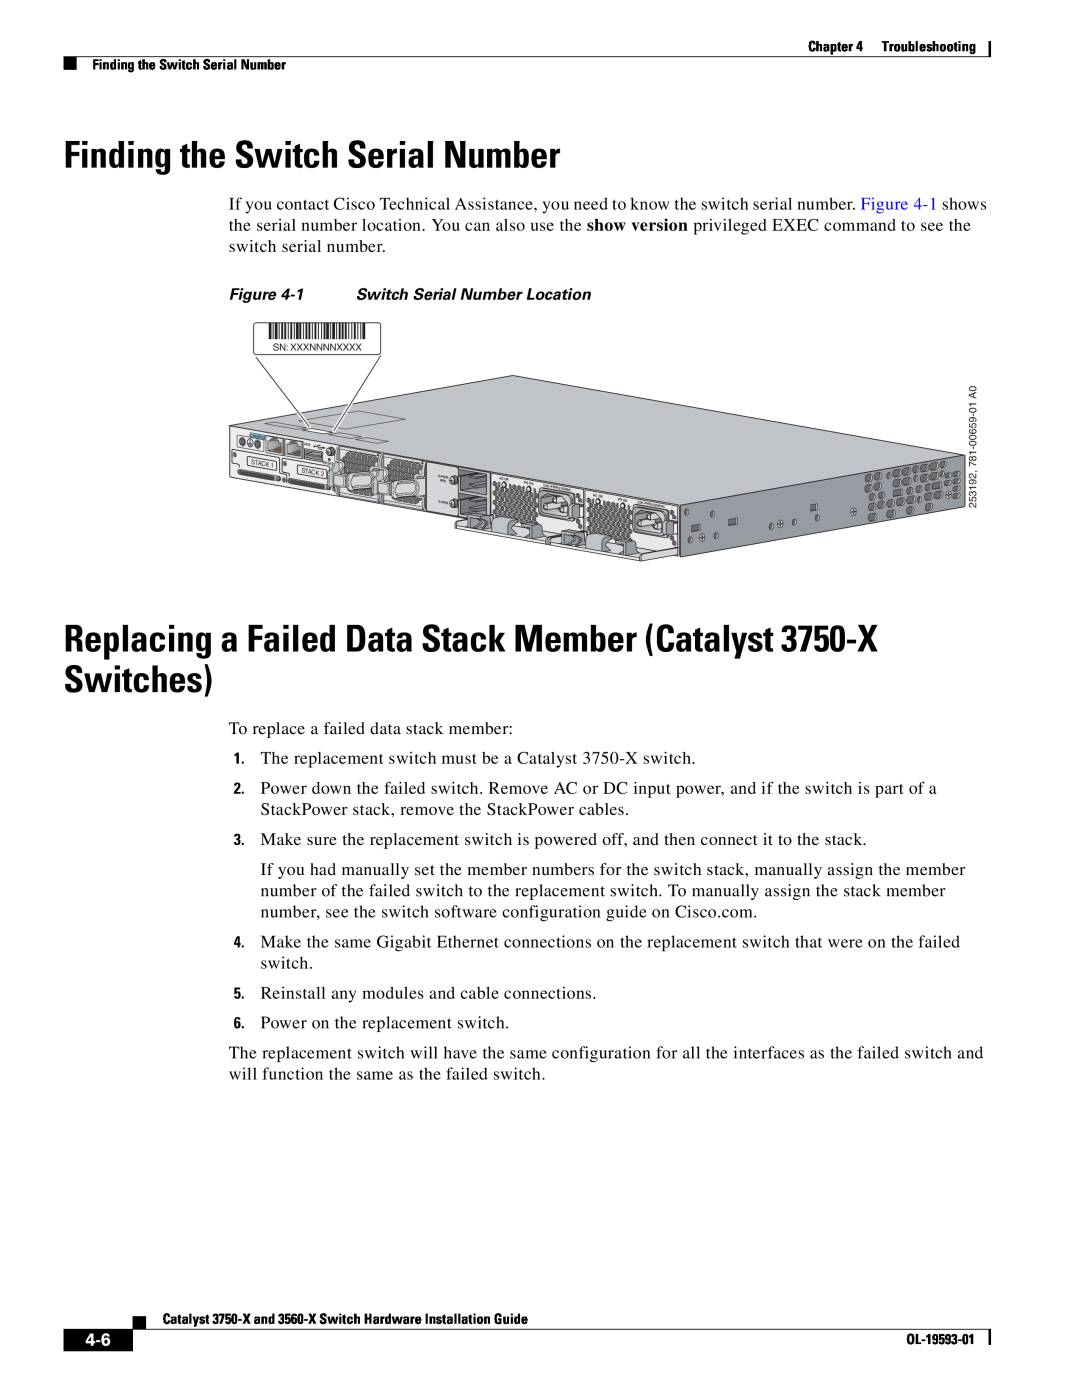 Cisco Systems 3560-X Finding the Switch Serial Number, Replacing a Failed Data Stack Member Catalyst 3750-X Switches 